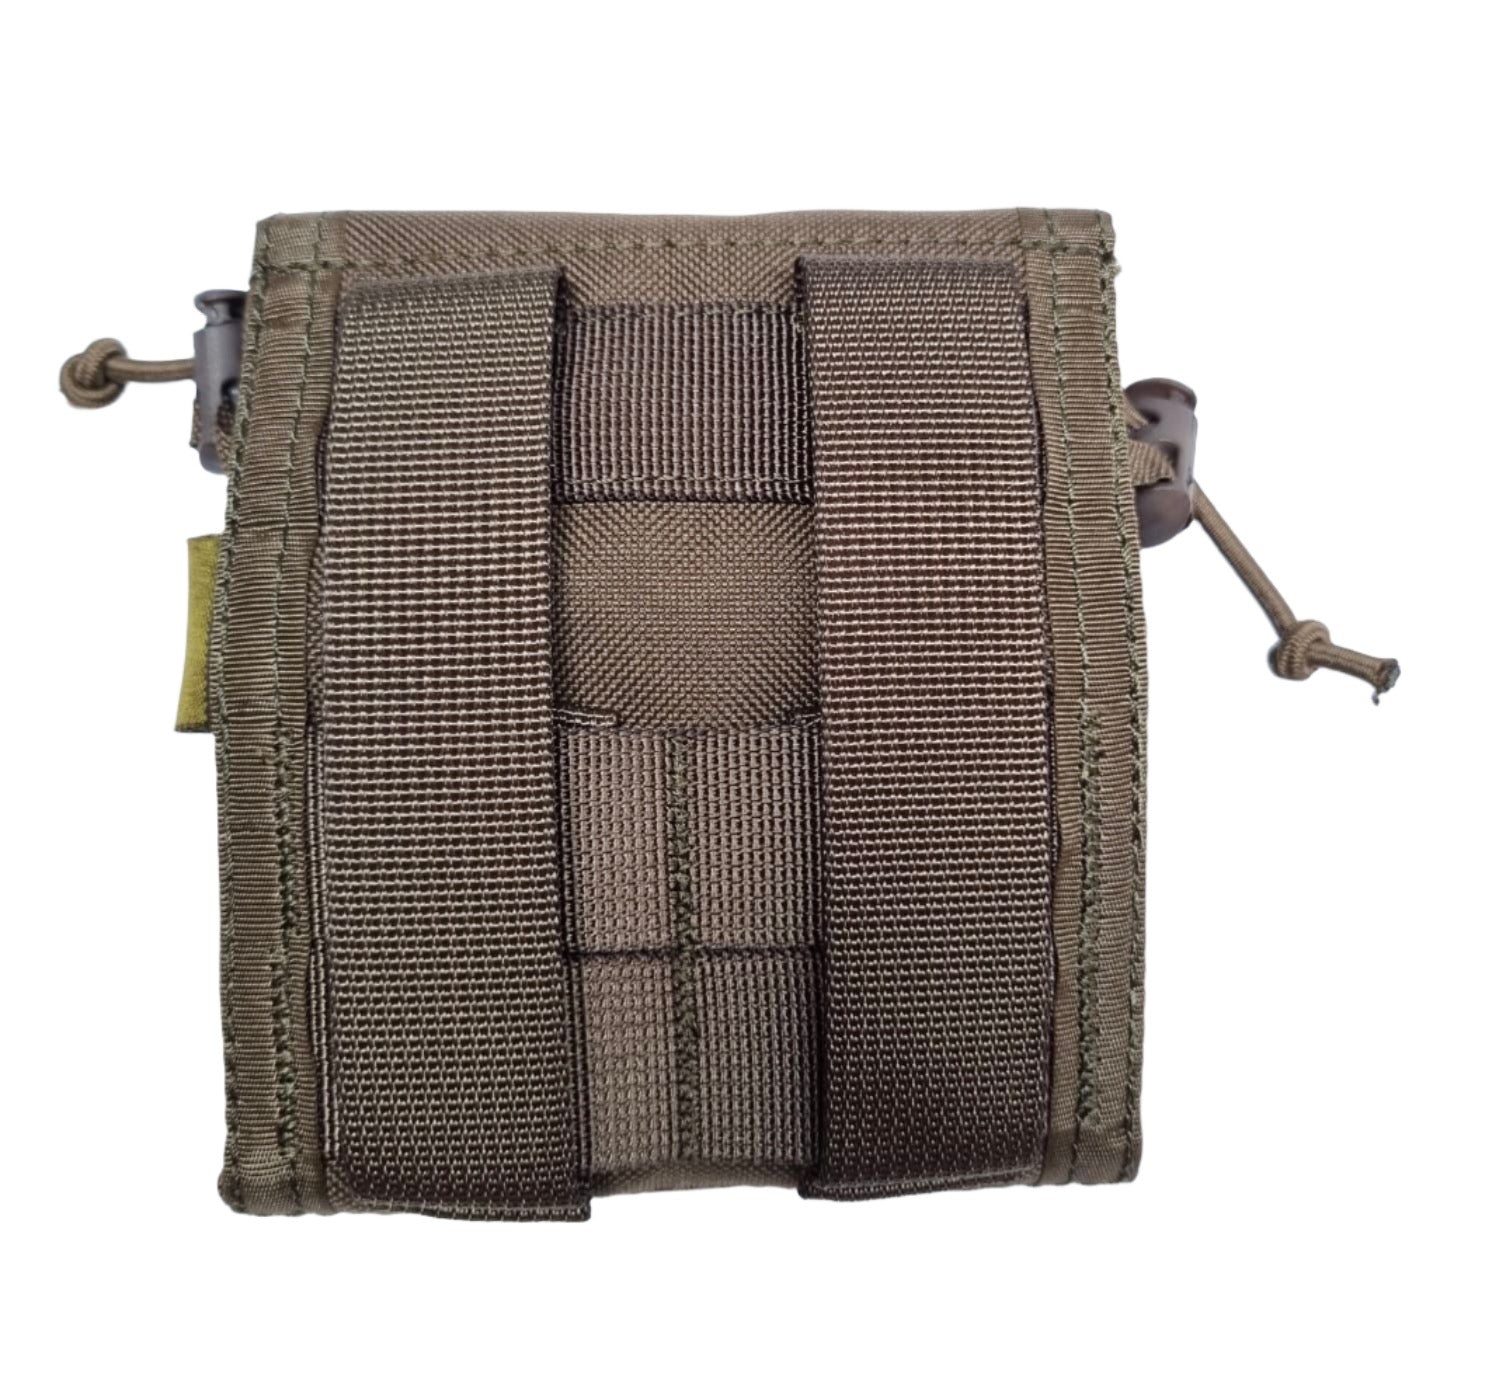 SHE-806 Molle Folding Dump pouch Color Army Green.